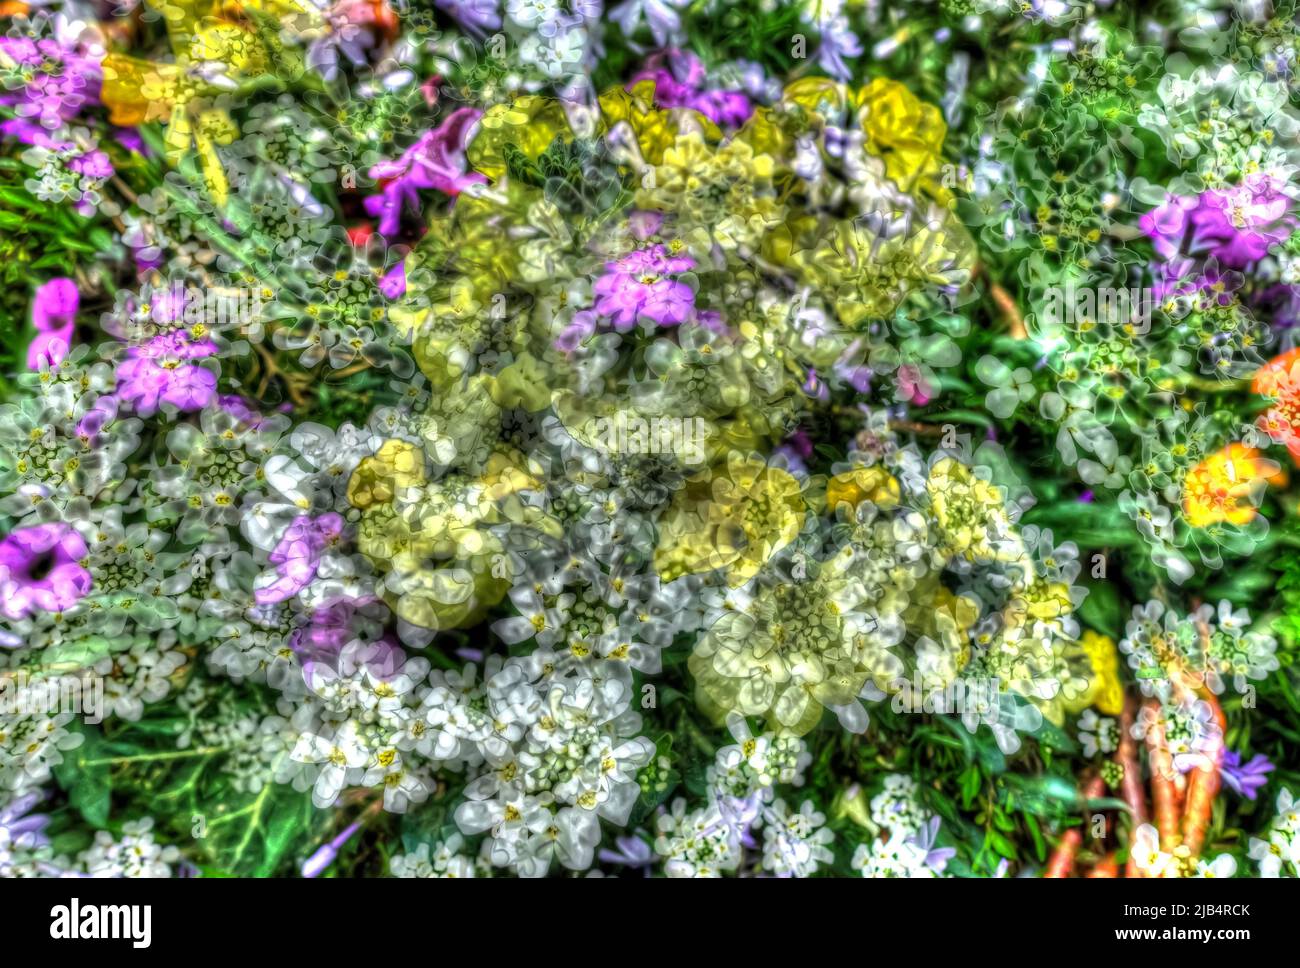 Flowers creative, artistic shot, candytufts (Iberis), white, yellow and purple flowers alienated, plants, mix of flowers, ground cover, fragrant, all Stock Photo